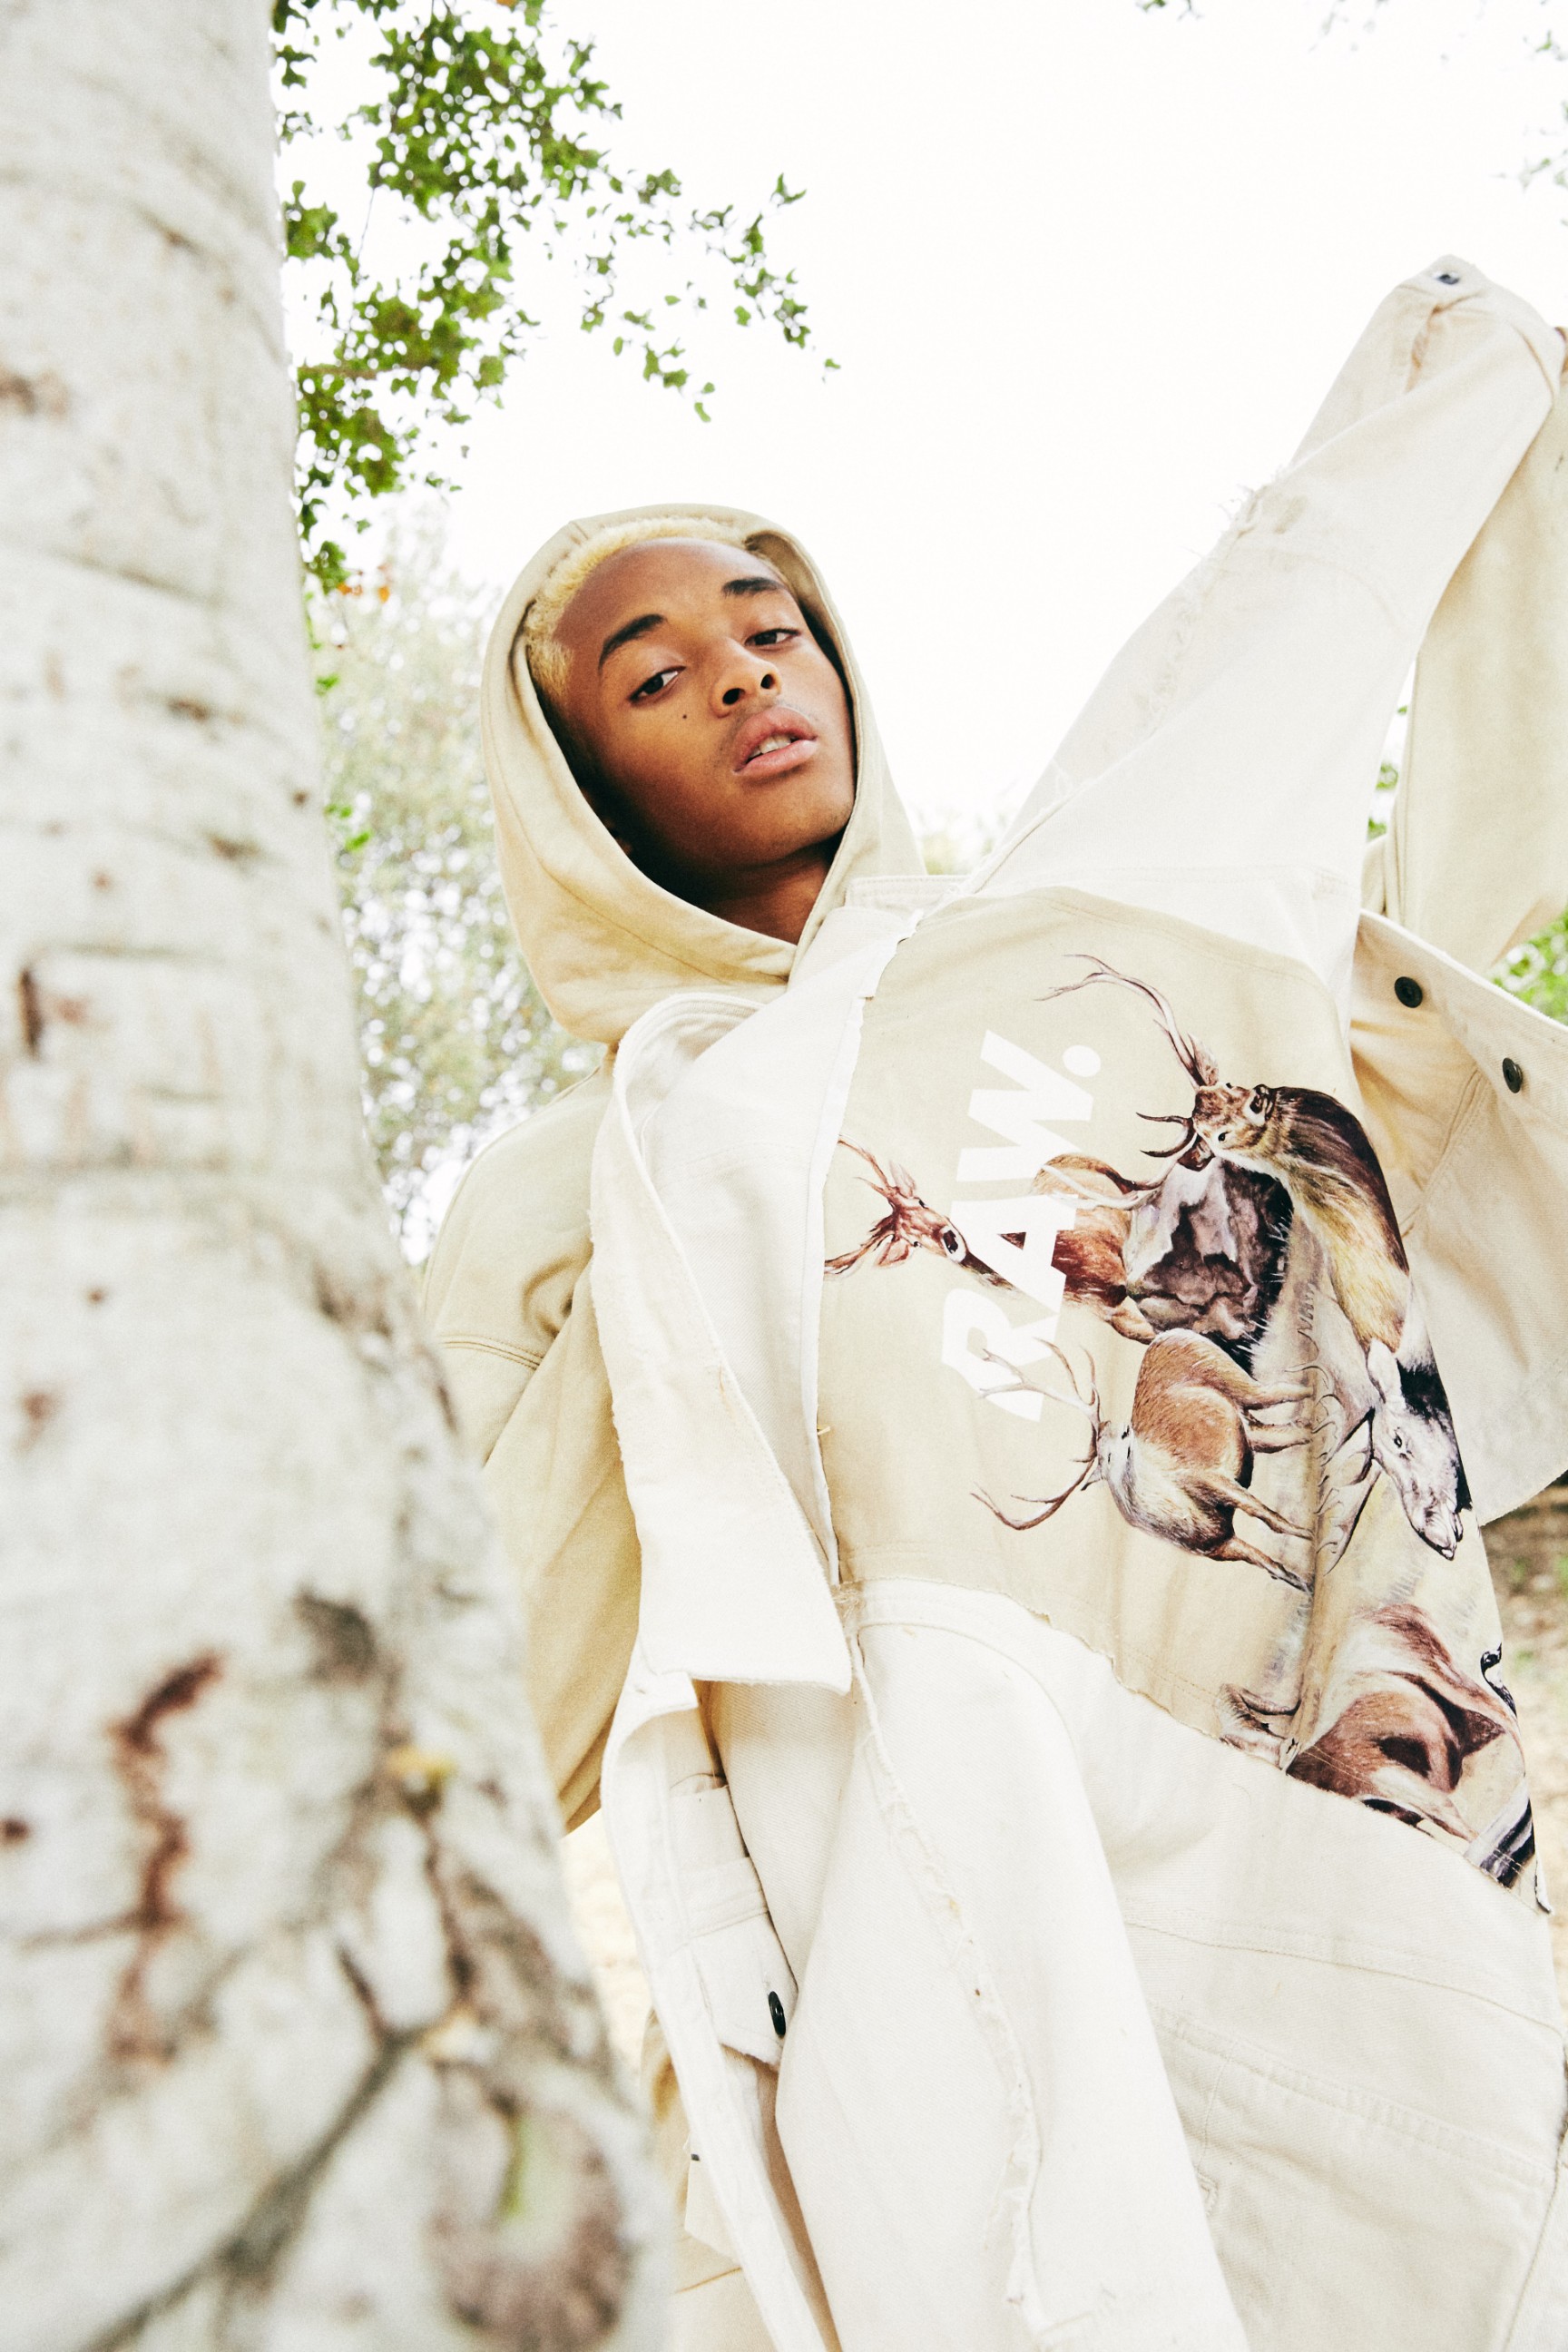 G-Star RAW and Jaden Smith Unveil their Collaborative ‘Forces of Nature’ Collection